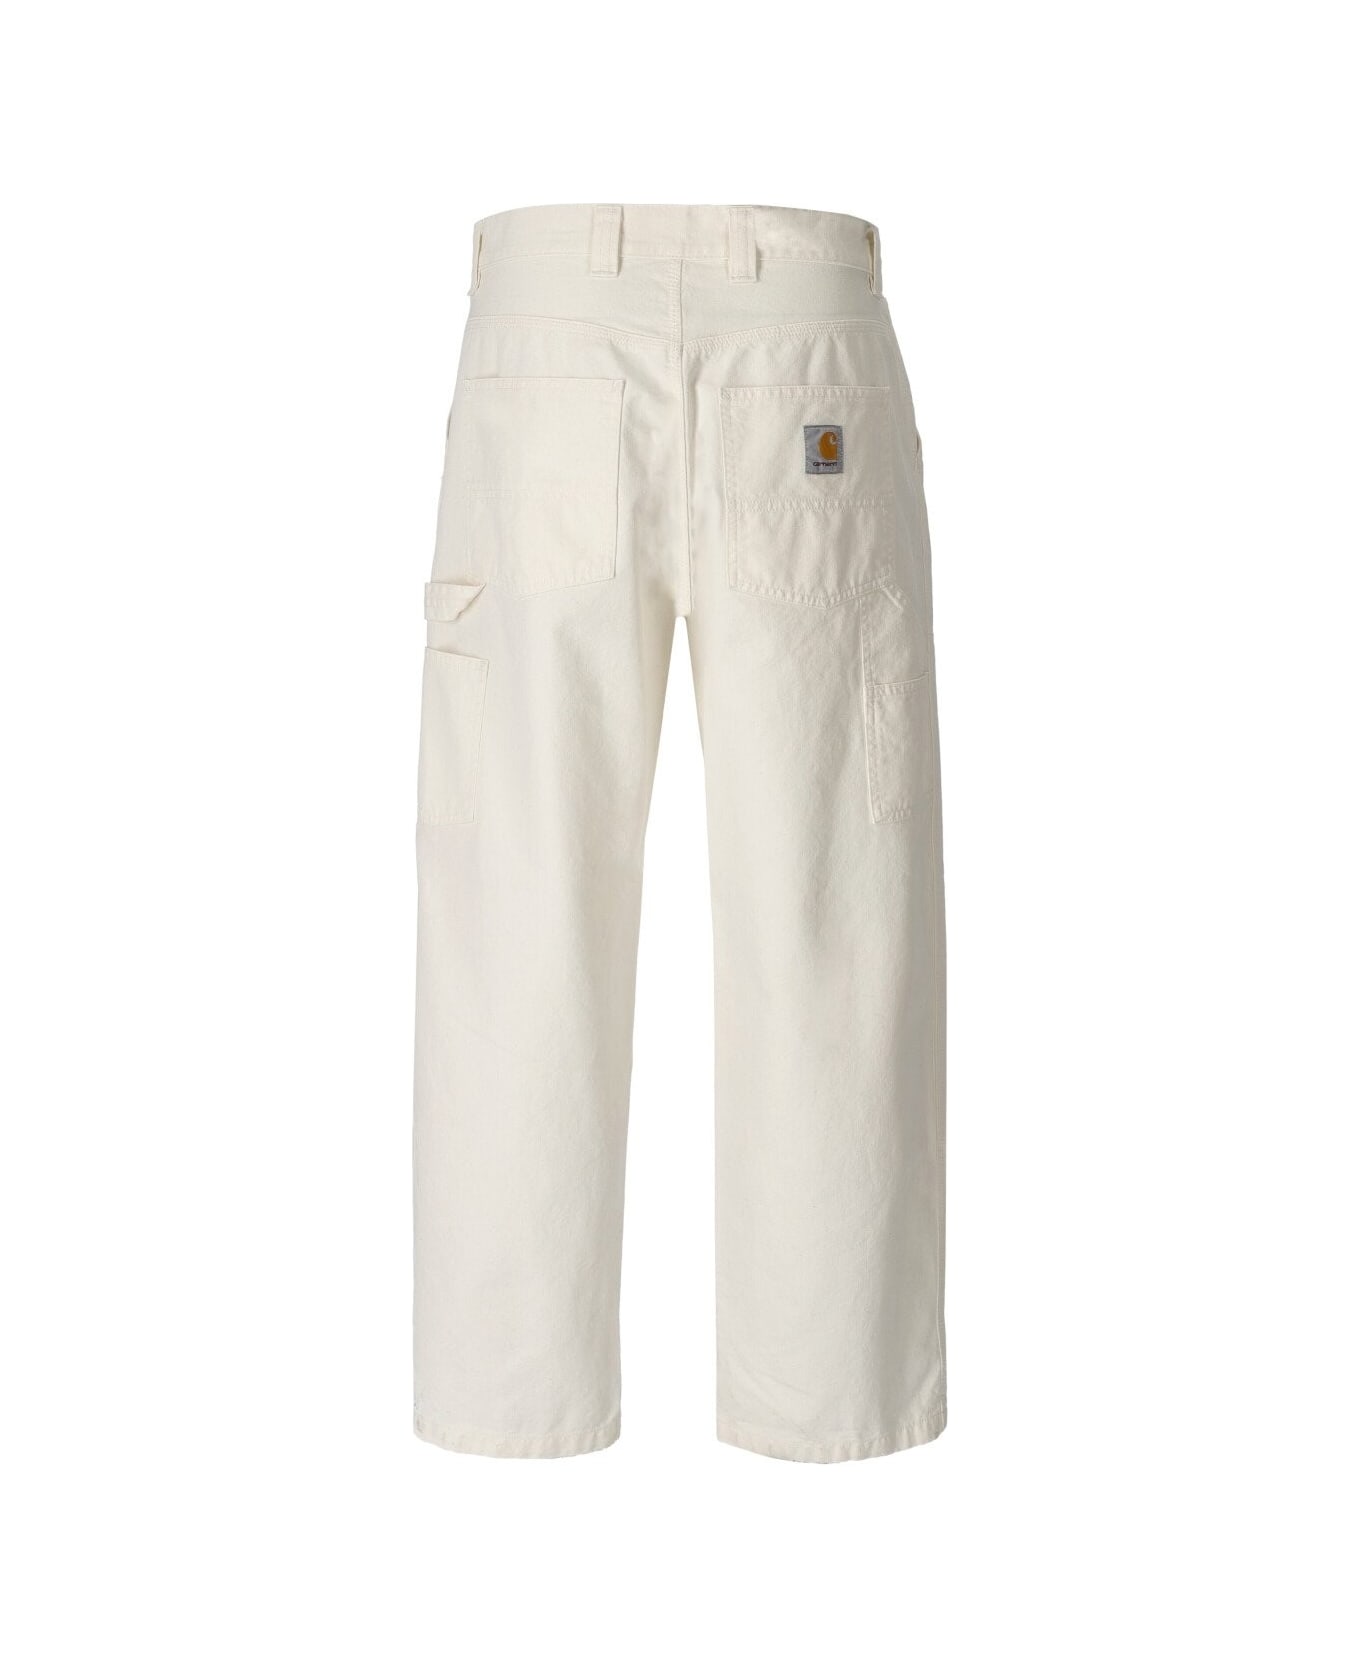 Carhartt Wip Wide Panel Off-white Trousers - Wax Rinsed